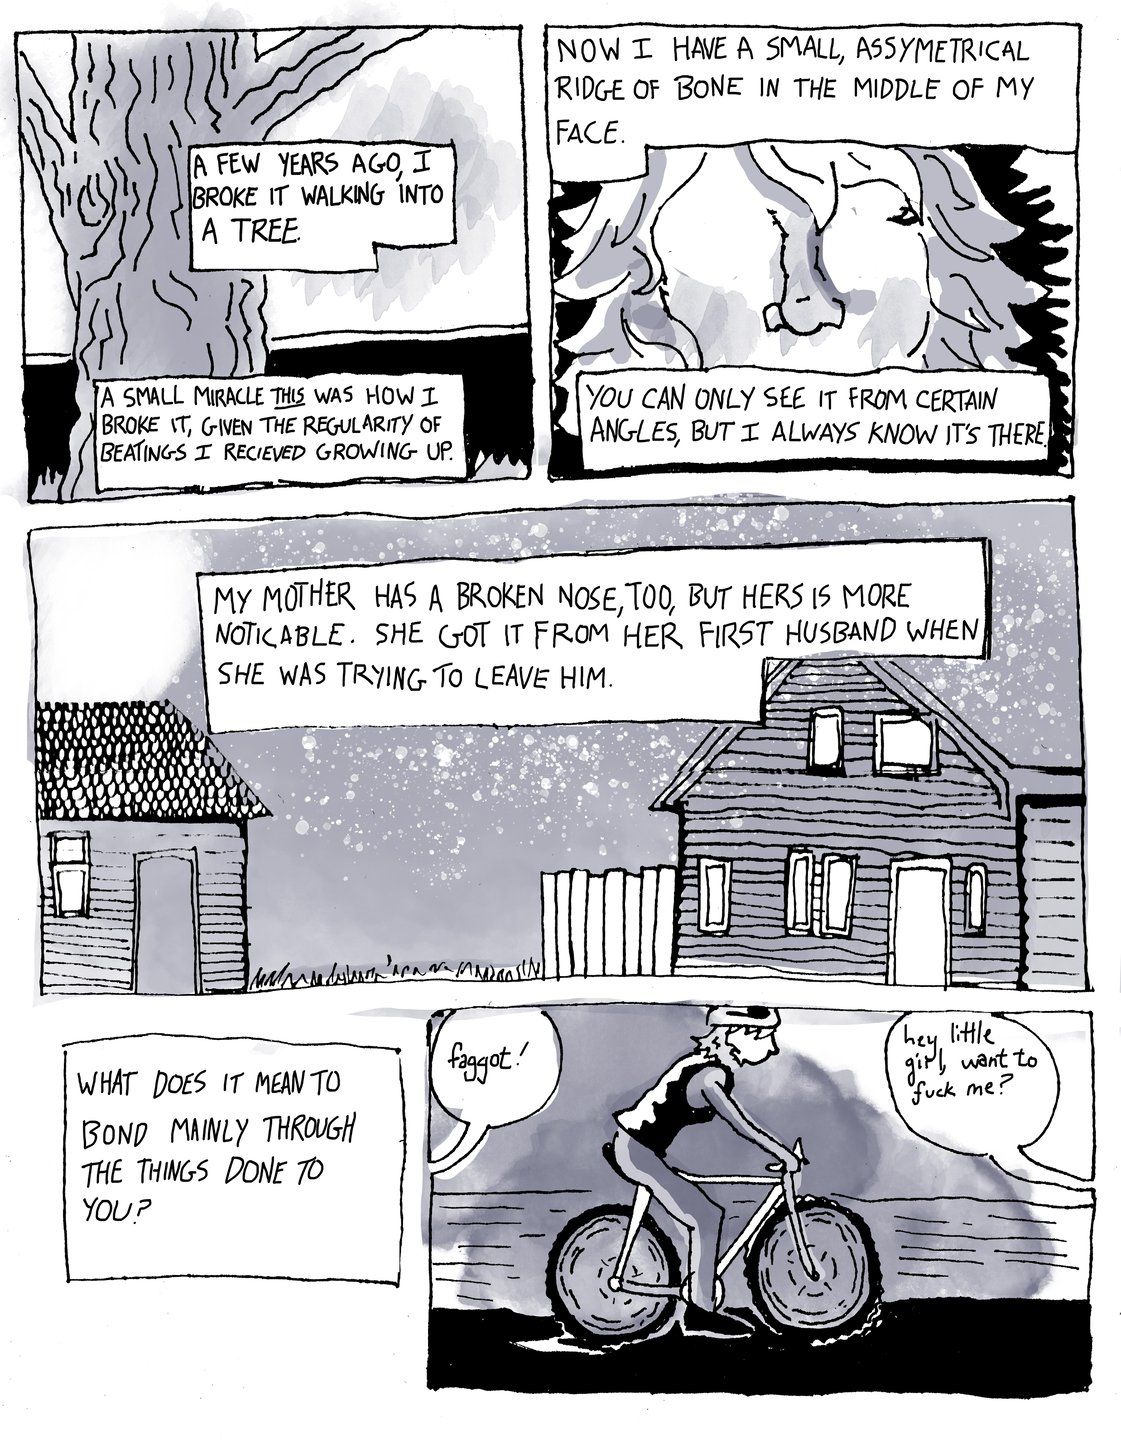 Page two, panel one: there is a drawing of a tree trunk with text that reads, “A few years ago, I broke it walking into a tree. A small miracle this is how I broke it, given the regularity of beatings I received growing up.” Panel two: A close-up of Zefyr’s face with a crooked nose. The text reads, “ now I have a small asymmetrical ridge of bone in the middle of my face. You can only see it from certain angles, but I always know it’s there.” Panel three: there are two houses in the snow. The text reads, “my mother has a broken nose, too, but hers is more noticeable. She got it from her first husband when she was trying to leave him. What does it mean to bond mainly through the things done to you?” Panel four: there is a drawing of Zefyr on a bike and speech bubbles coming from outside the frame that read, “faggot!” and “ hey little girl, want to fuck me?”